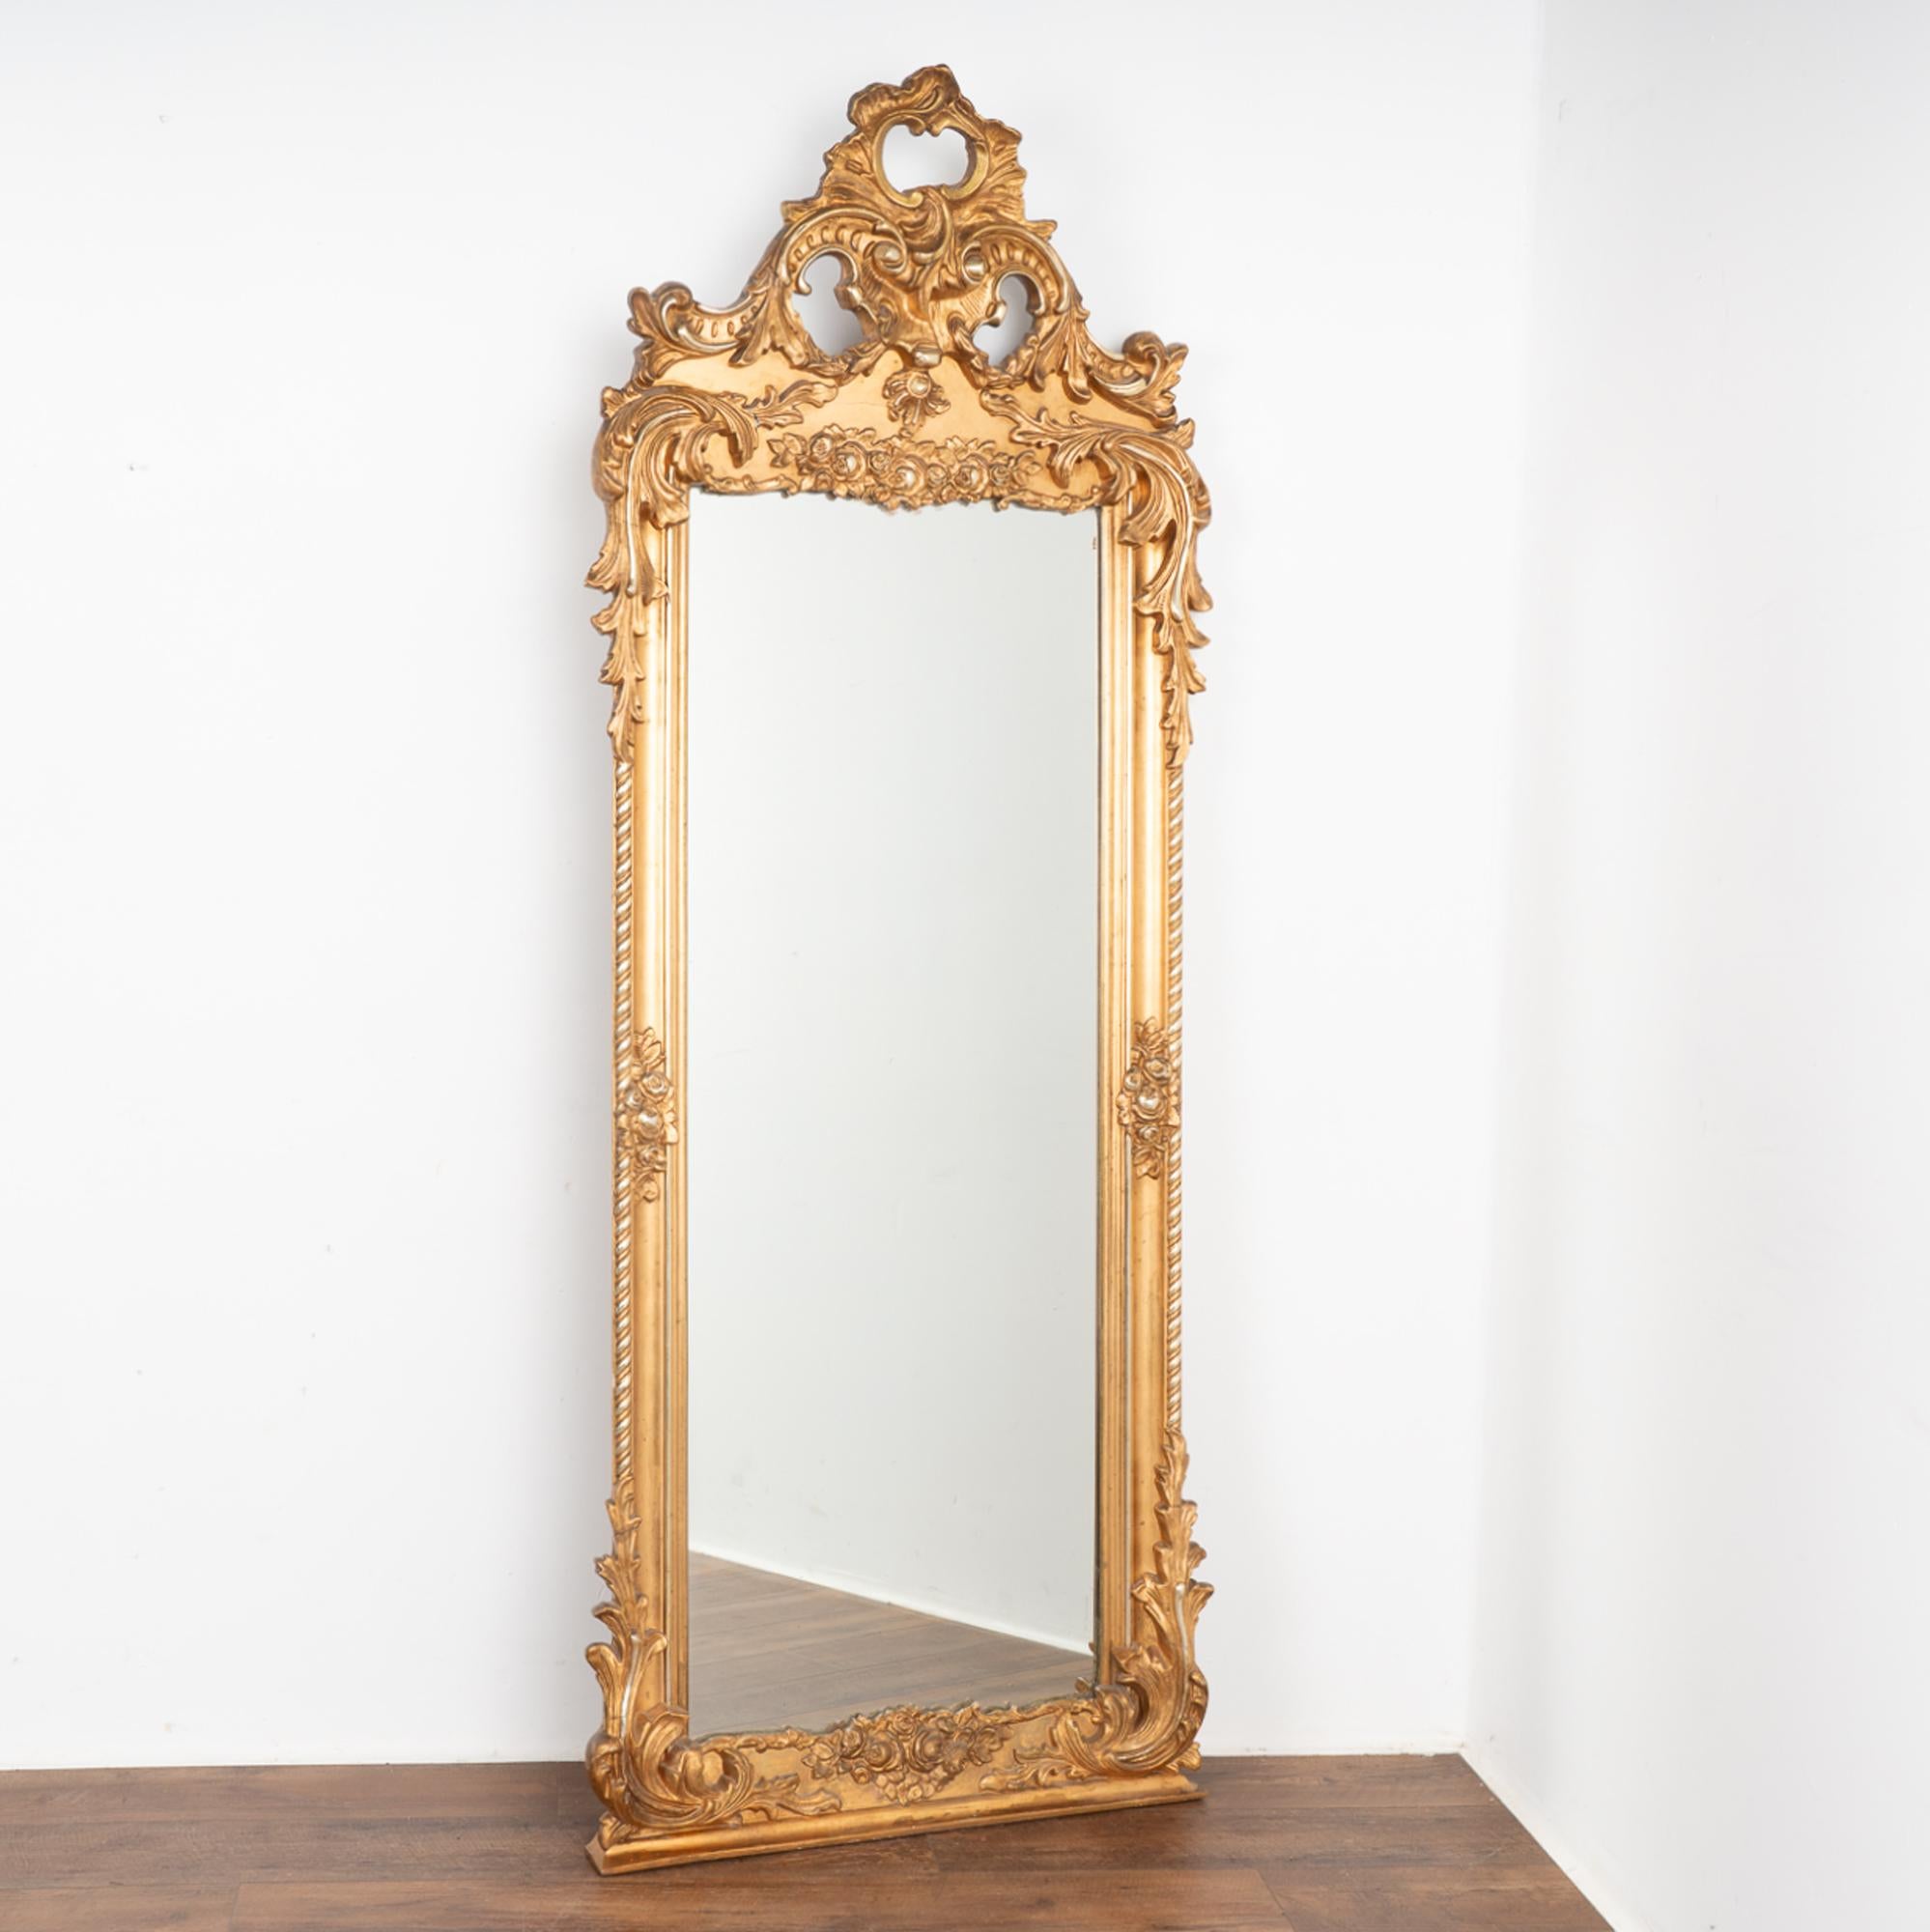 This stunning 7' gold gilt mirror is crowned with carved flowers and flourishes. The sides and lower corners/bottom are accented with refined effect.
There is expected age-related wear as seen where the gilt has been worn off, chipped or multiple